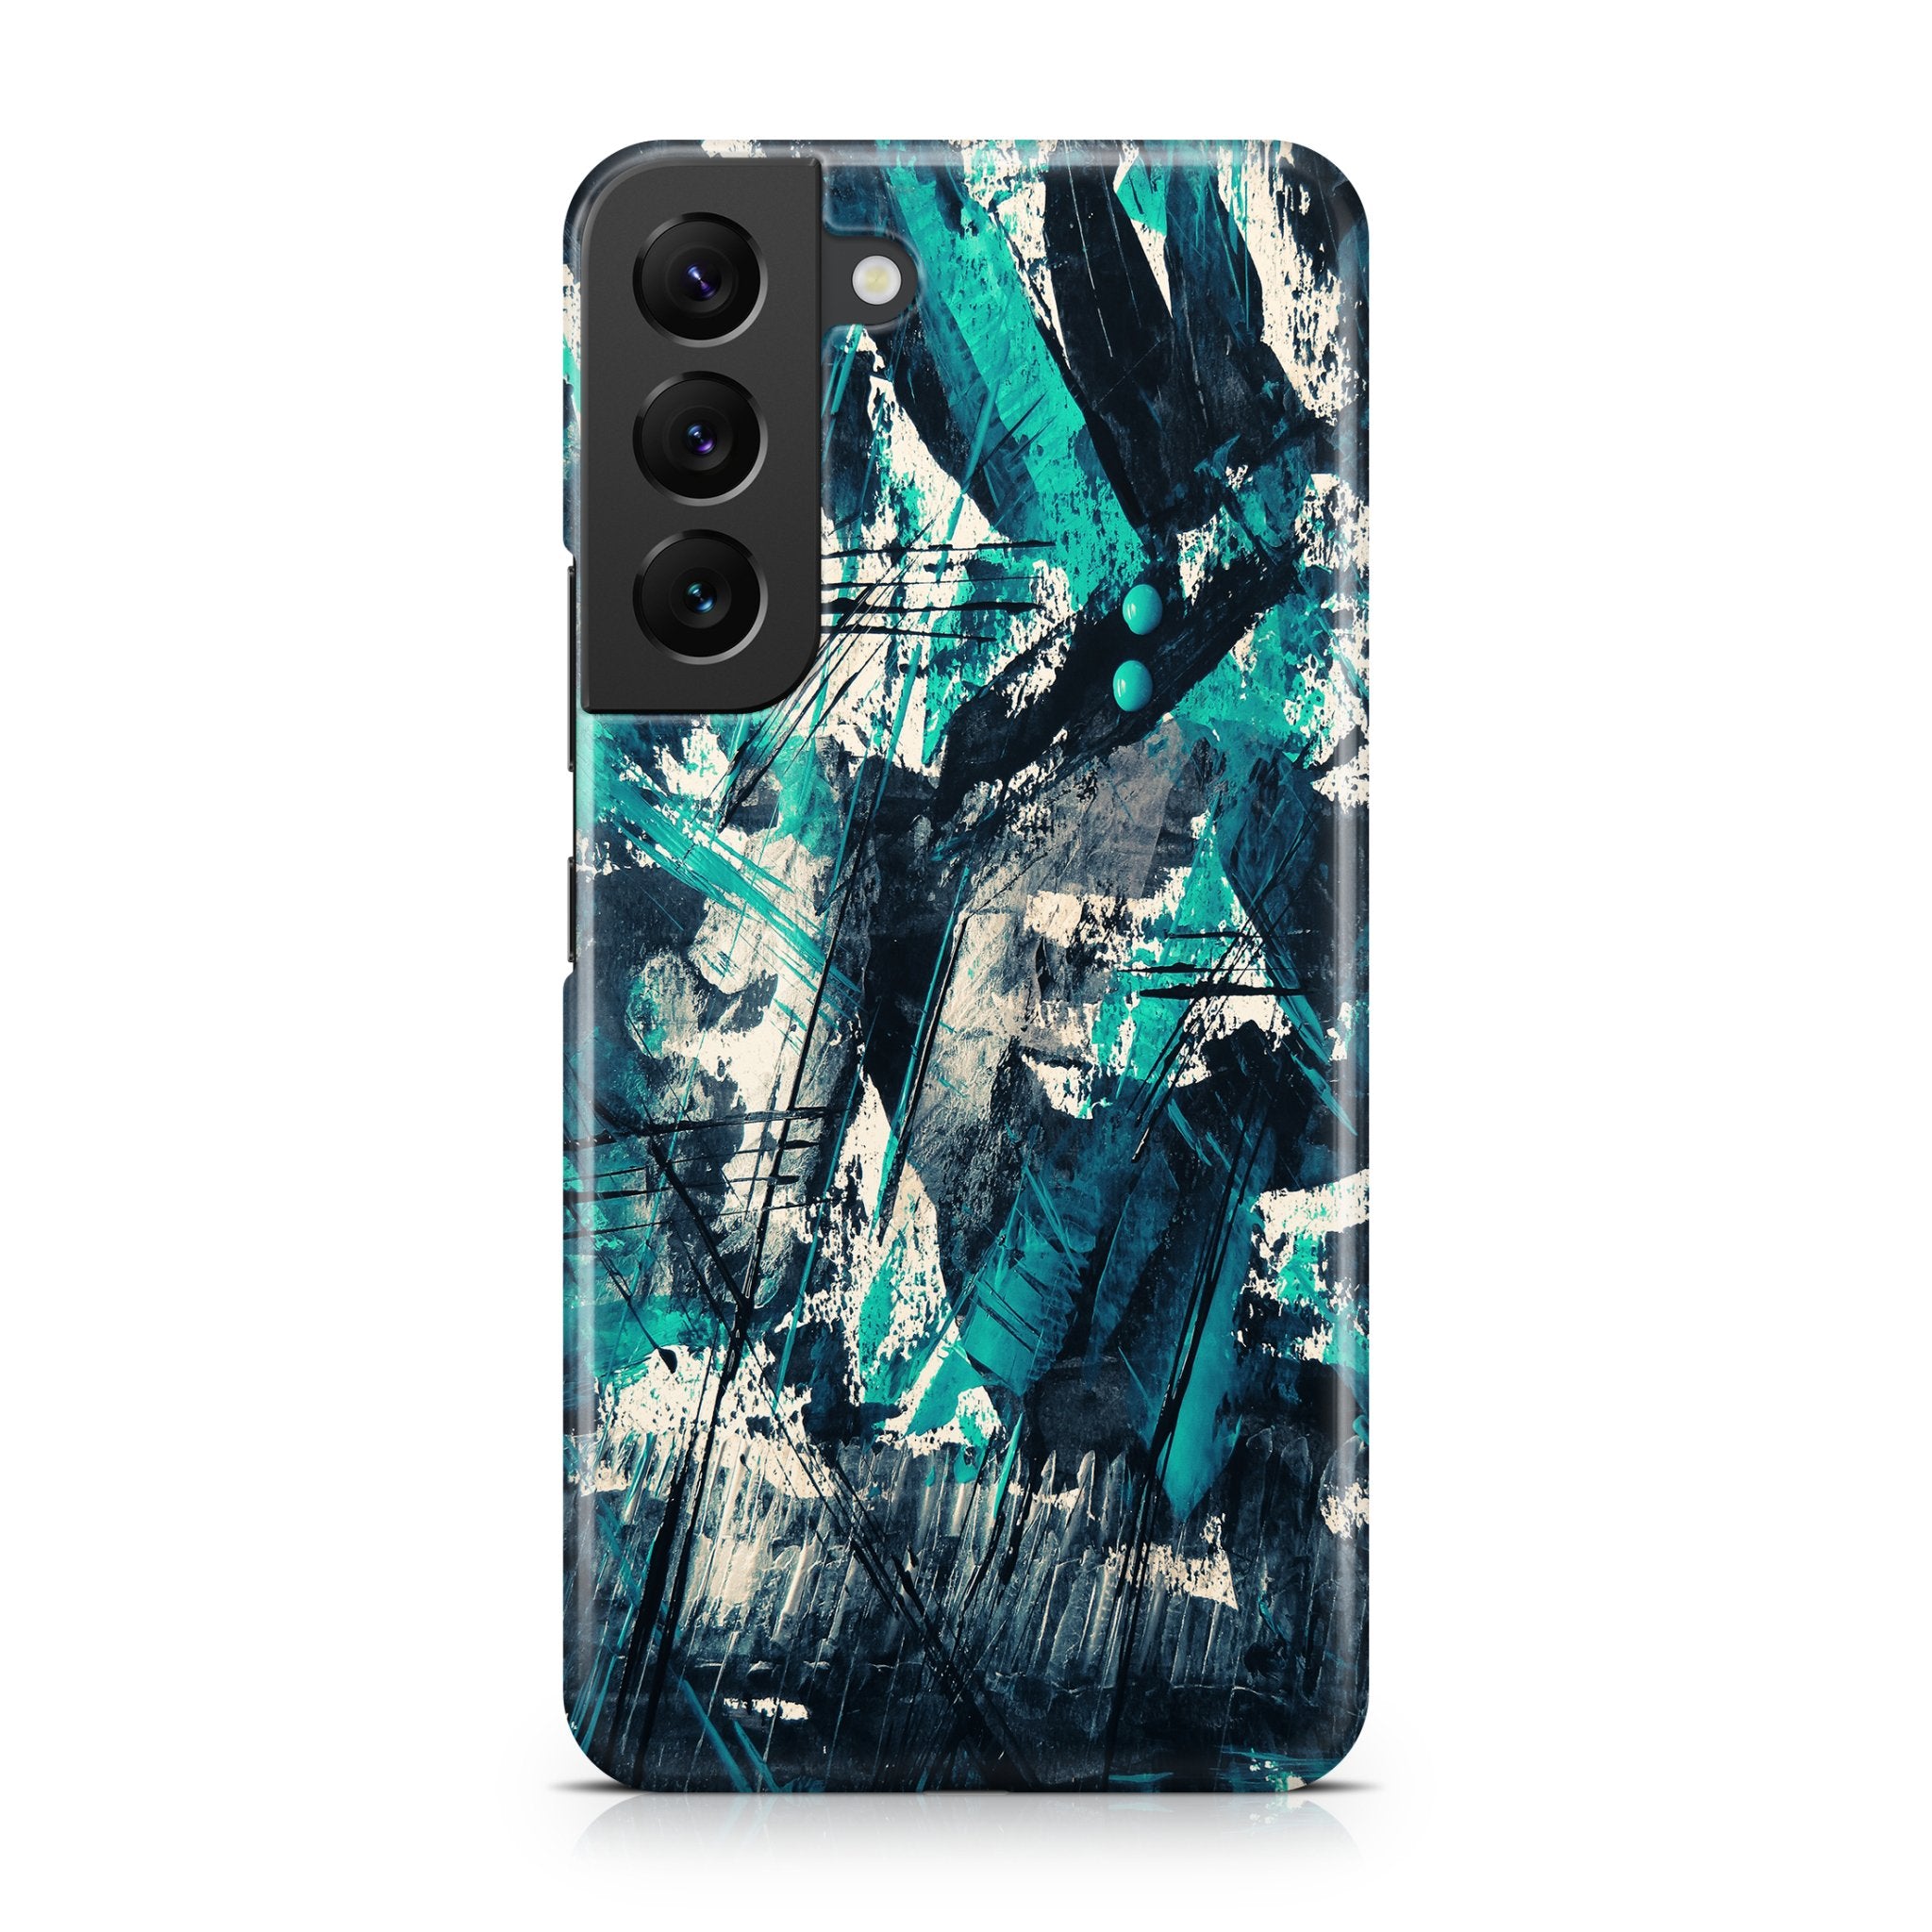 Blue Chaos - Samsung phone case designs by CaseSwagger